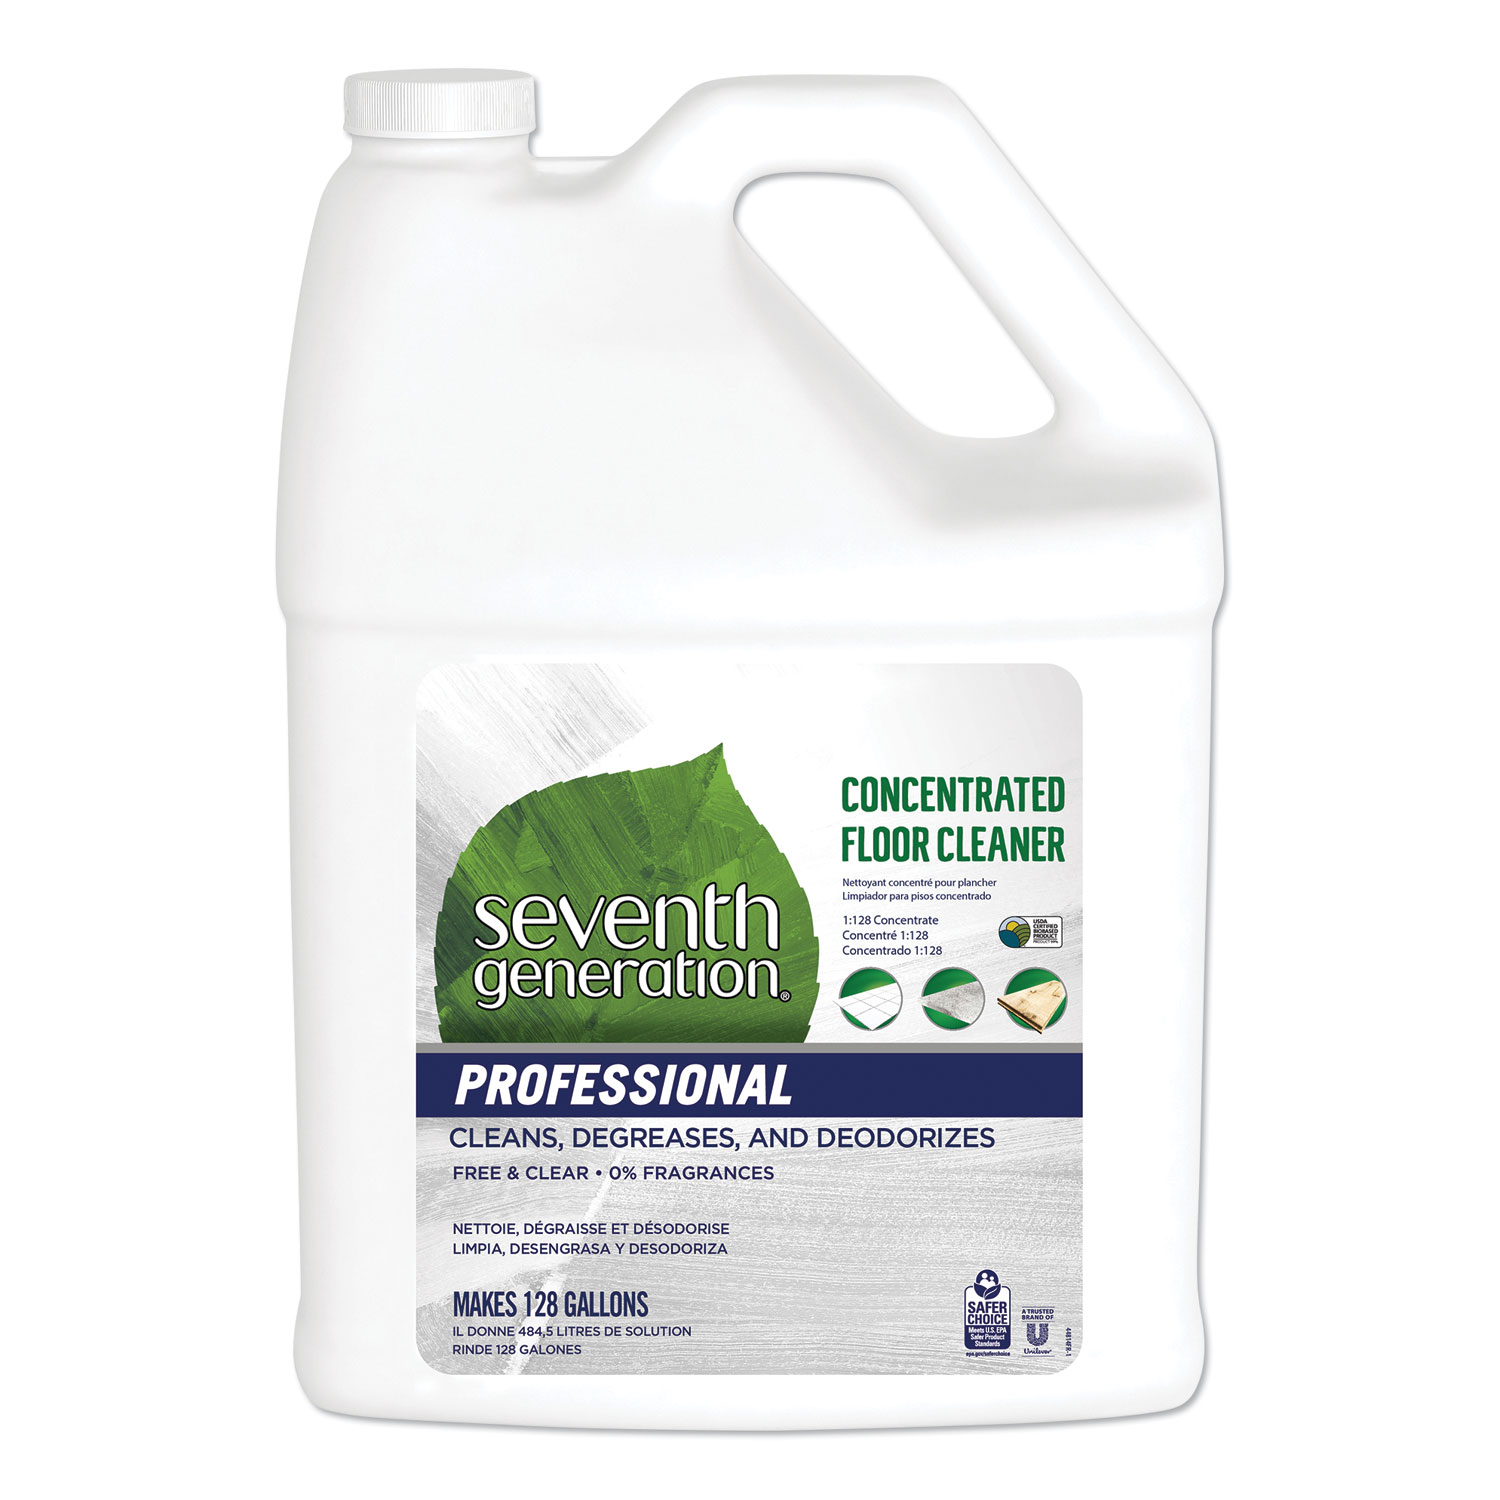  Seventh Generation Professional 44814CT Concentrated Floor Cleaner, Free and Clear, 1 gal Bottle, 2/Carton (SEV44814CT) 